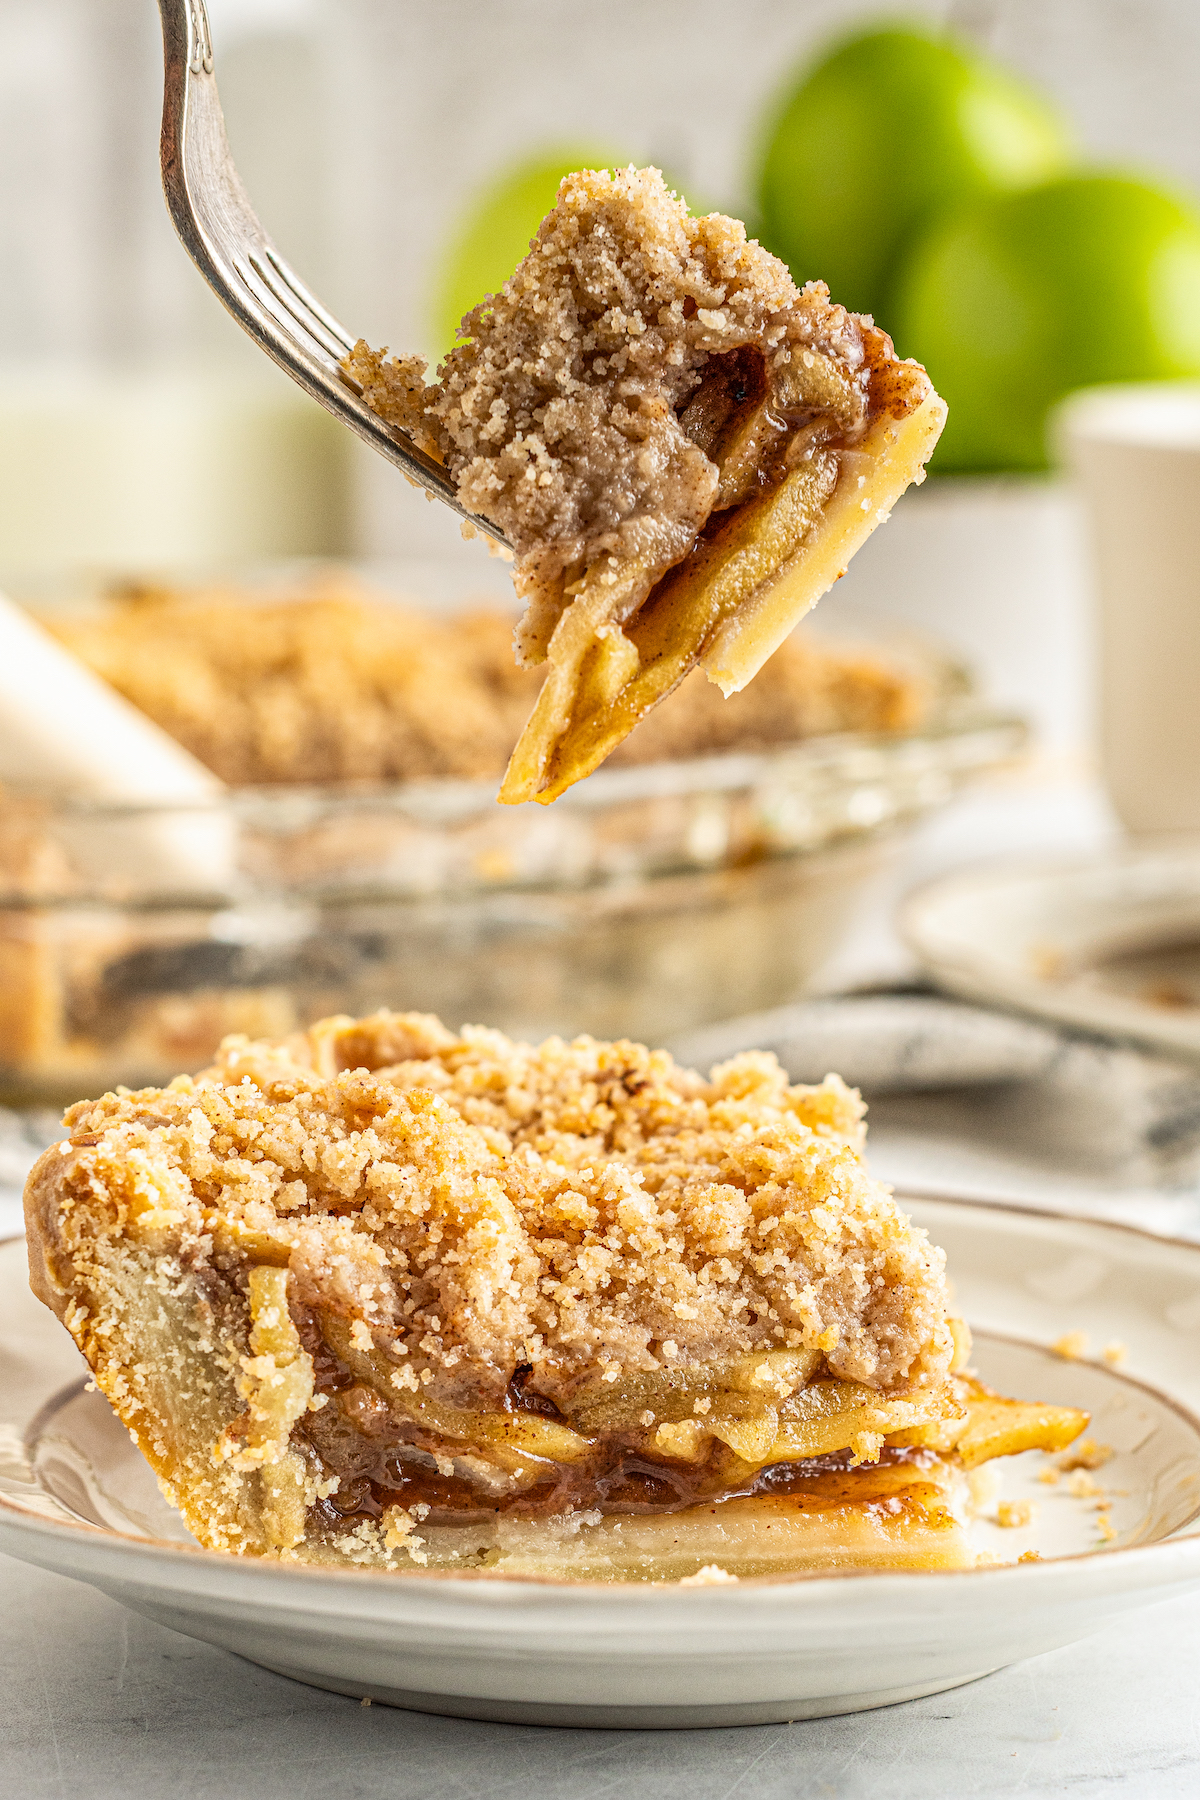 A slice of Dutch apple pie on a plate, with a fork holding a bite over the pie